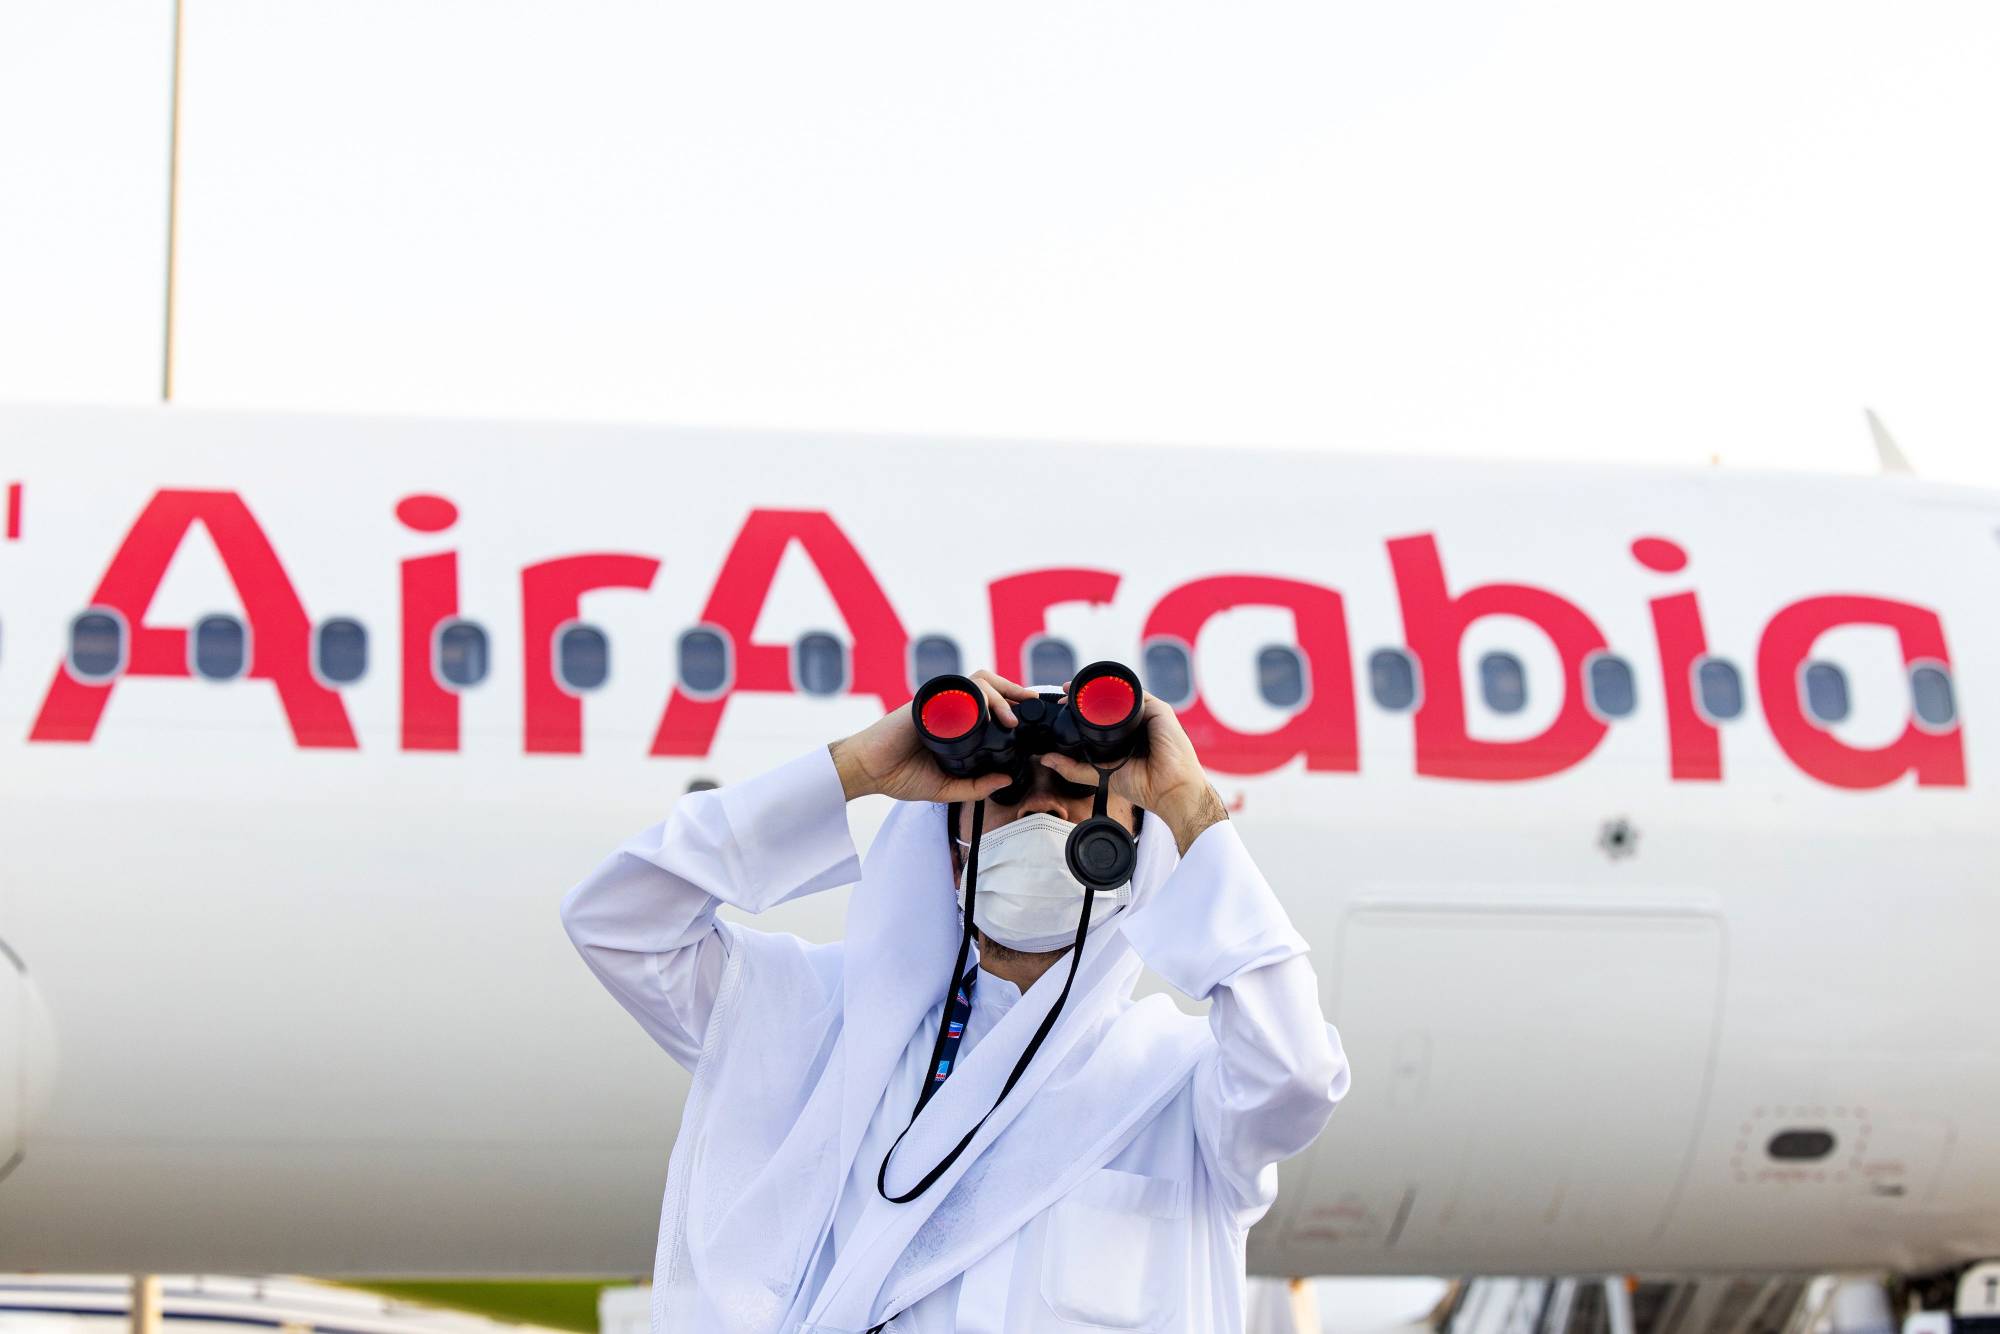 An attendee watches an aircraft display at the 17th Dubai Air Show in November. | BLOOMBERG